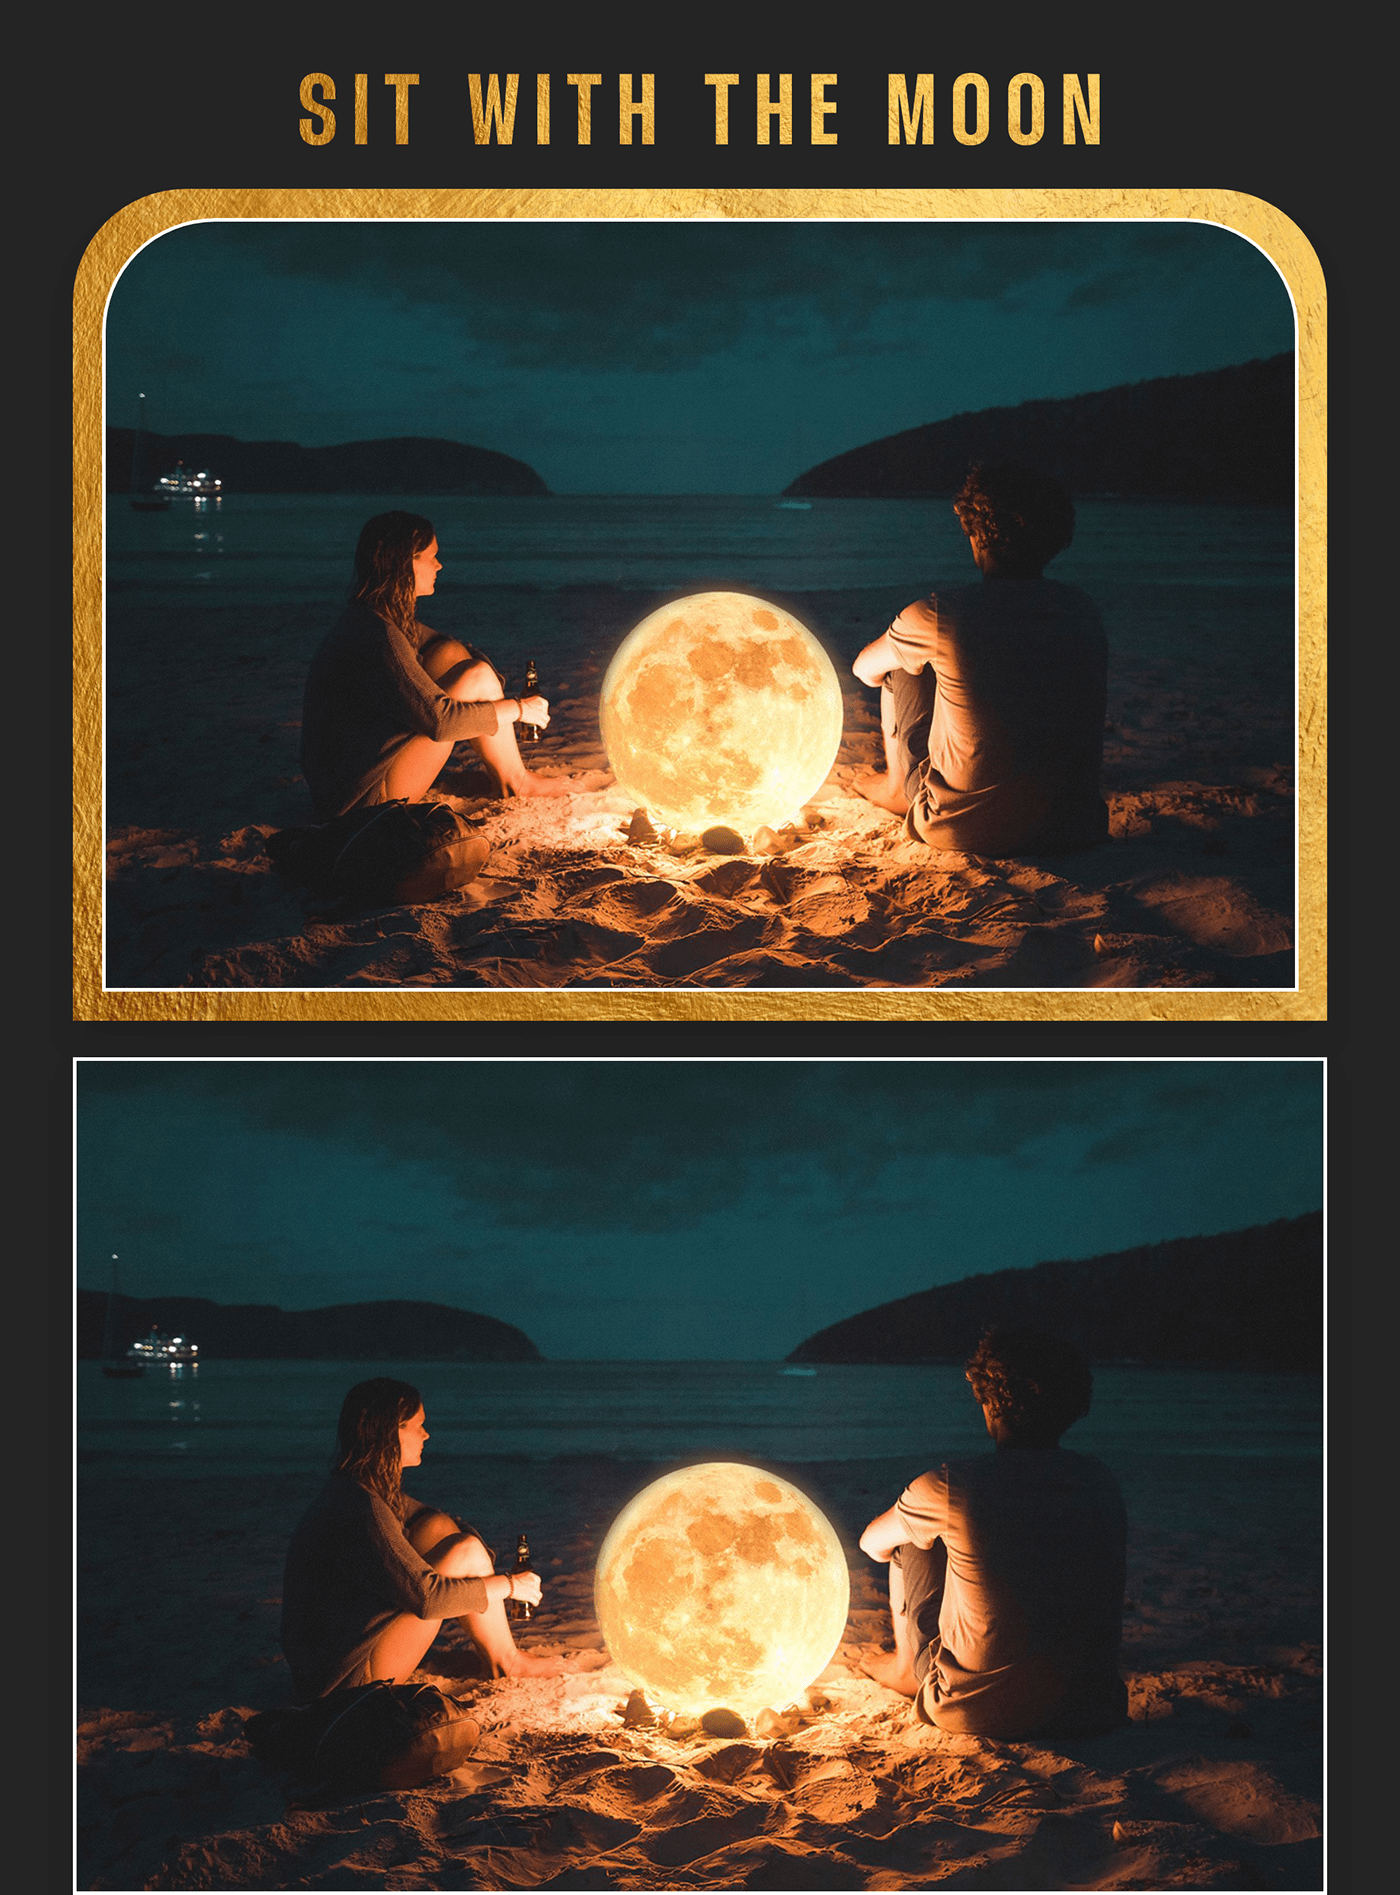 Sit with the moon ^_^ sit with moon book cover coverbook manipulation photo